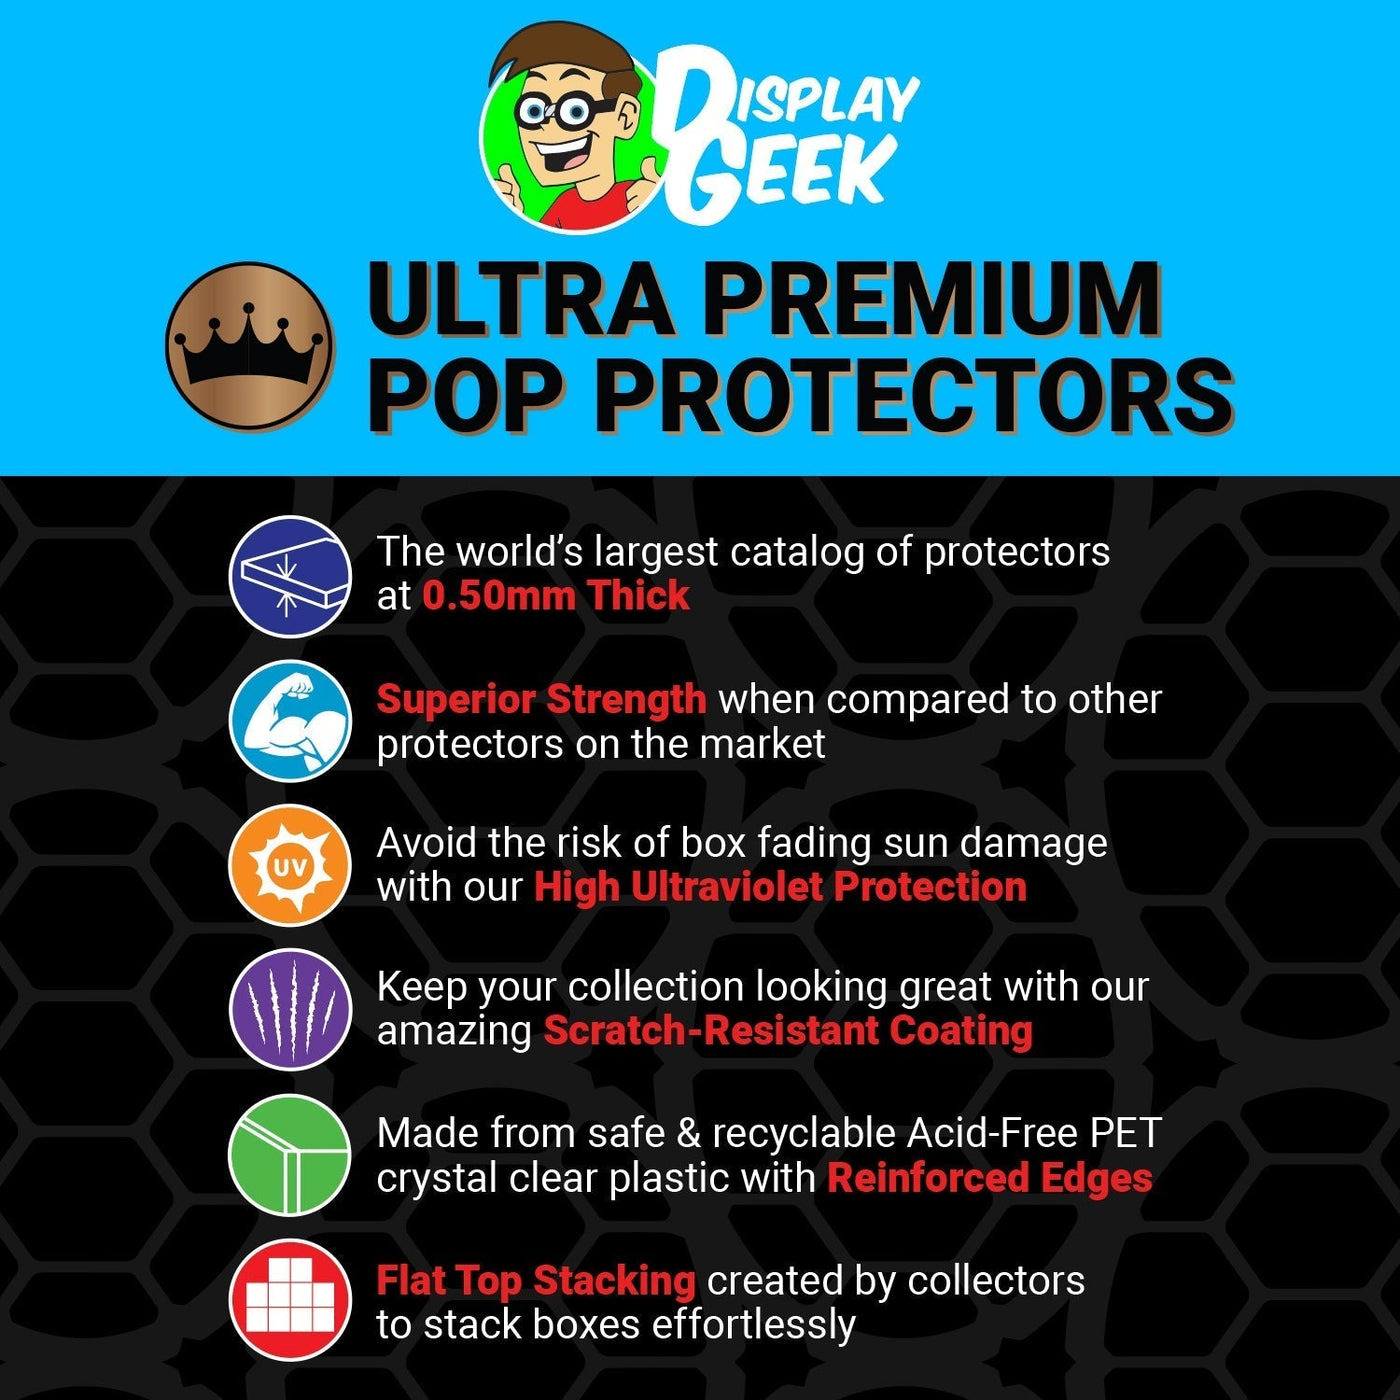 Pop Protector for 2 Pack The Duffer Brothers Upside Down Funko Pop on The Protector Guide App by Display Geek